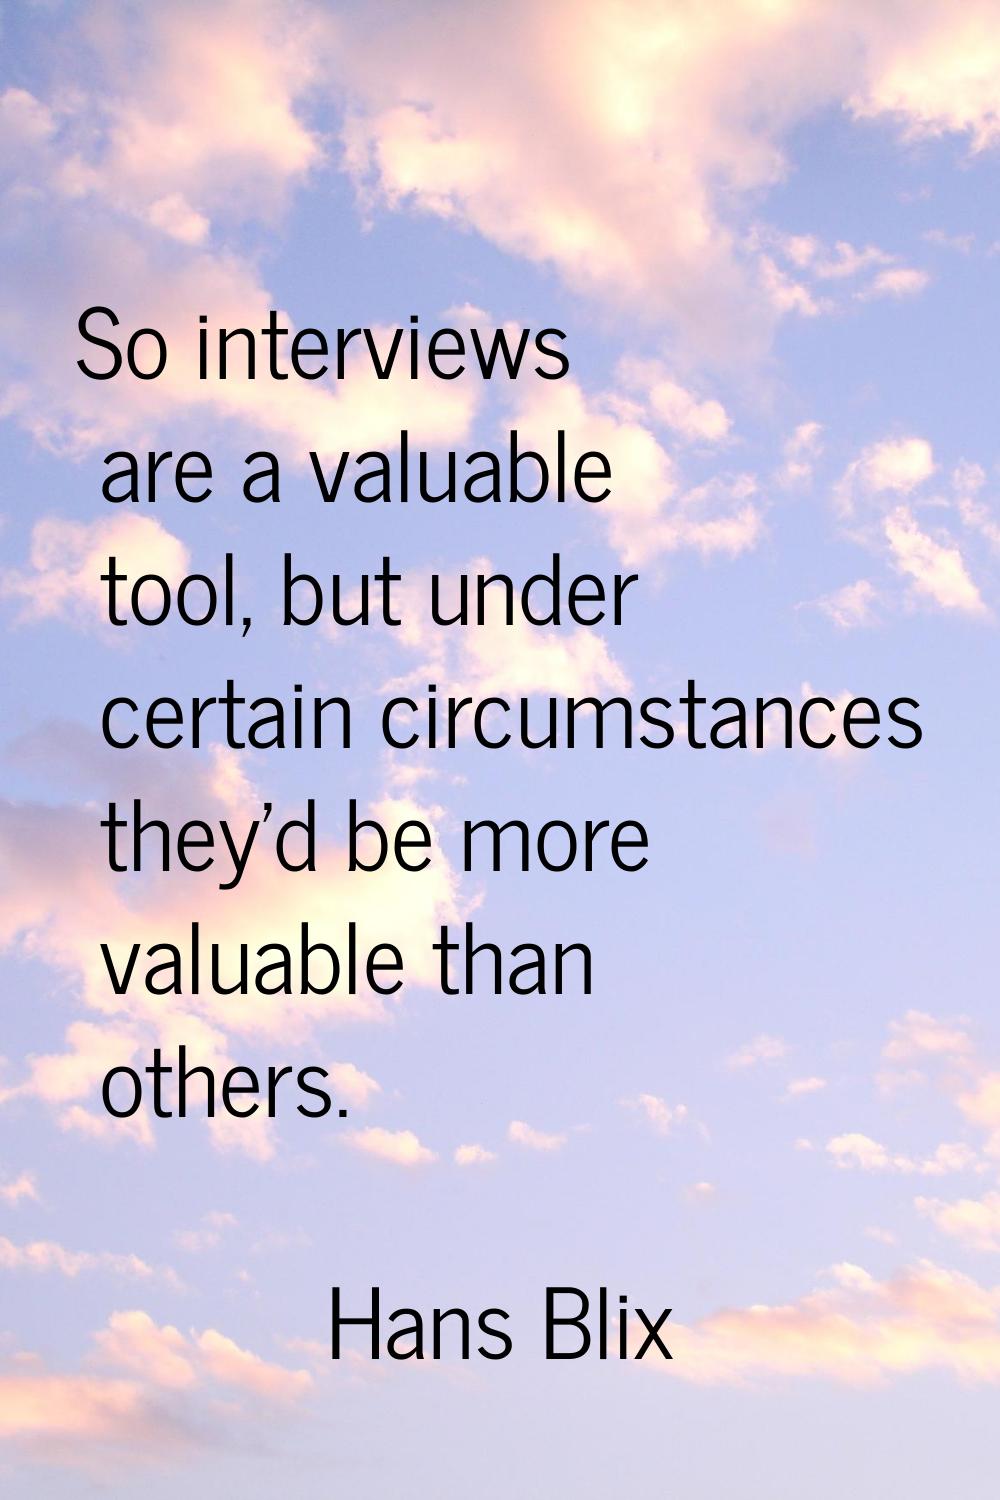 So interviews are a valuable tool, but under certain circumstances they'd be more valuable than oth